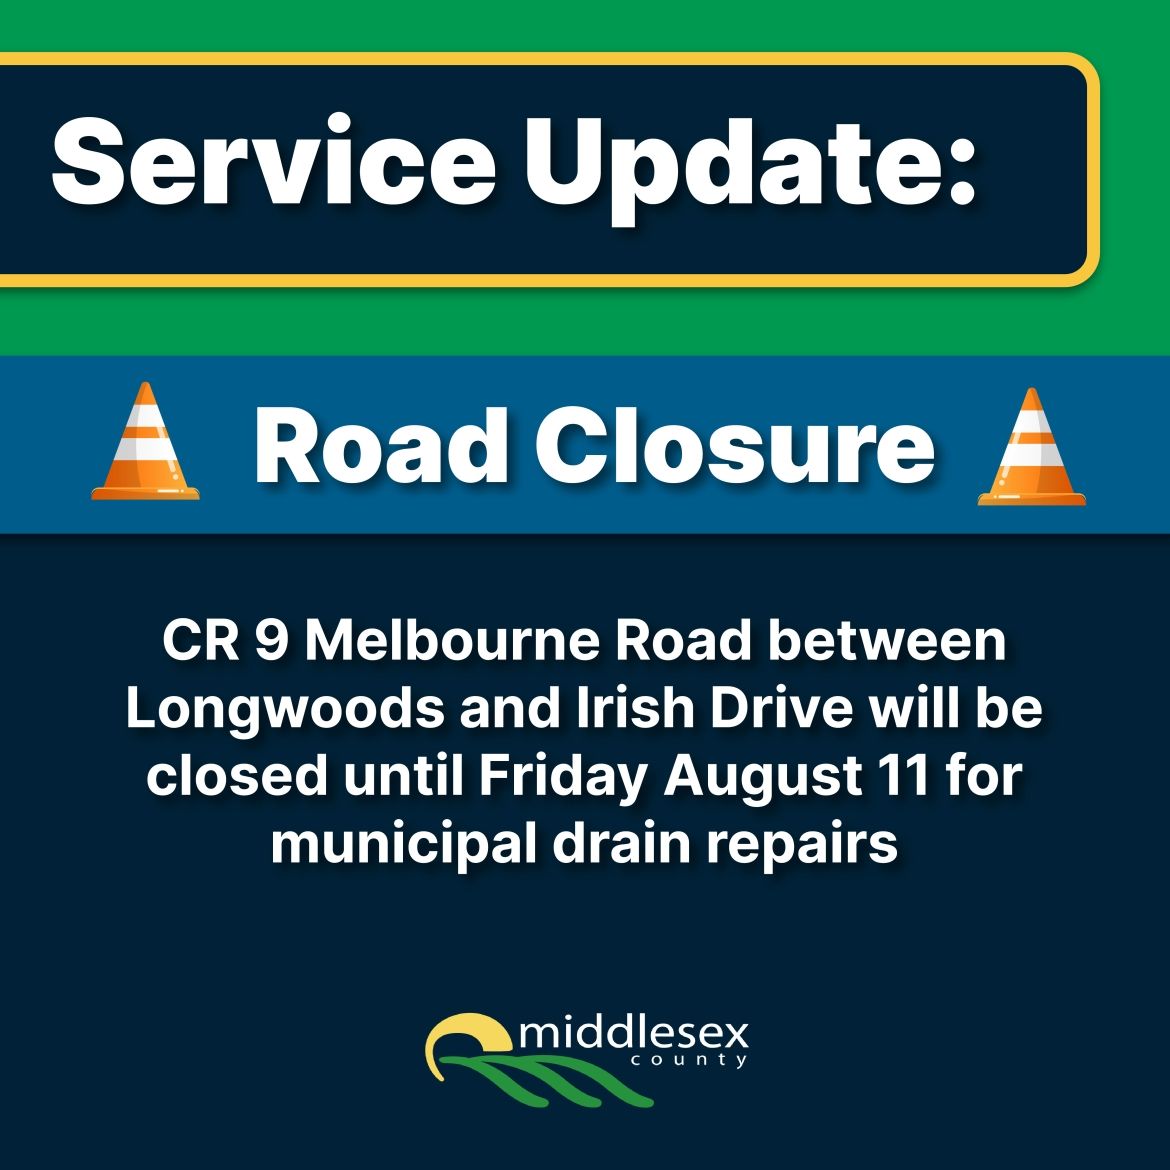 Melbourne Road closed August 11